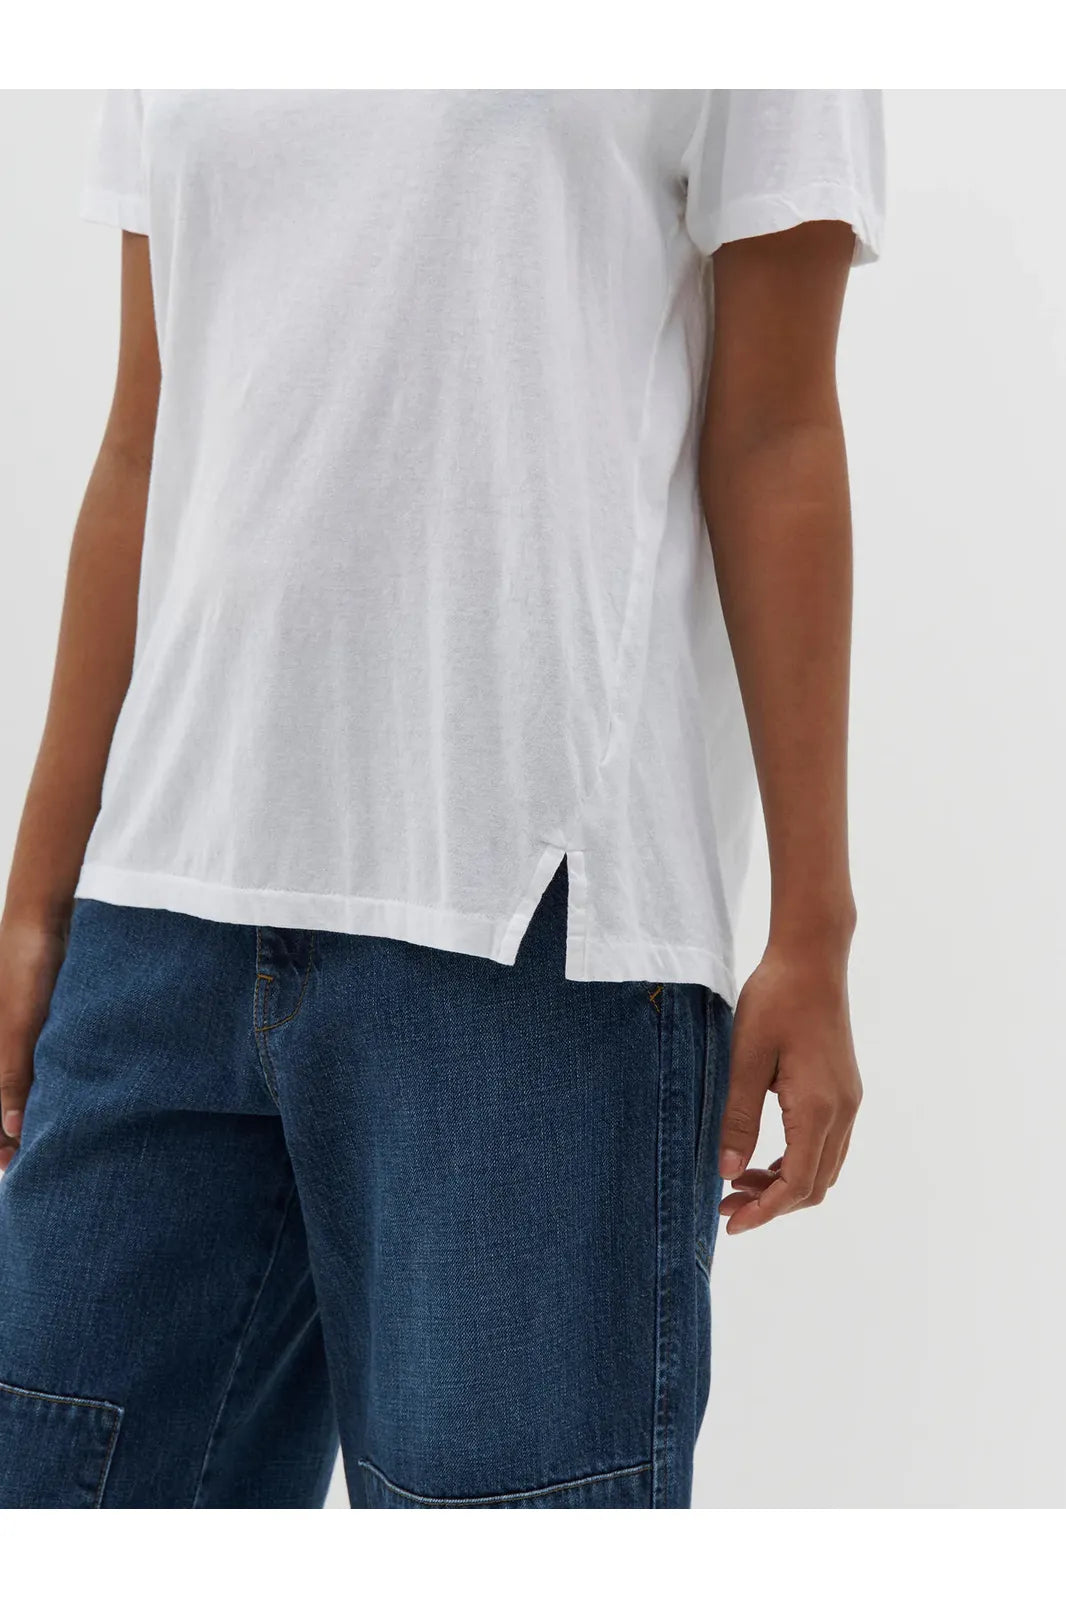 Regular Classic Short Sleeve T-shirt in White by Bassike